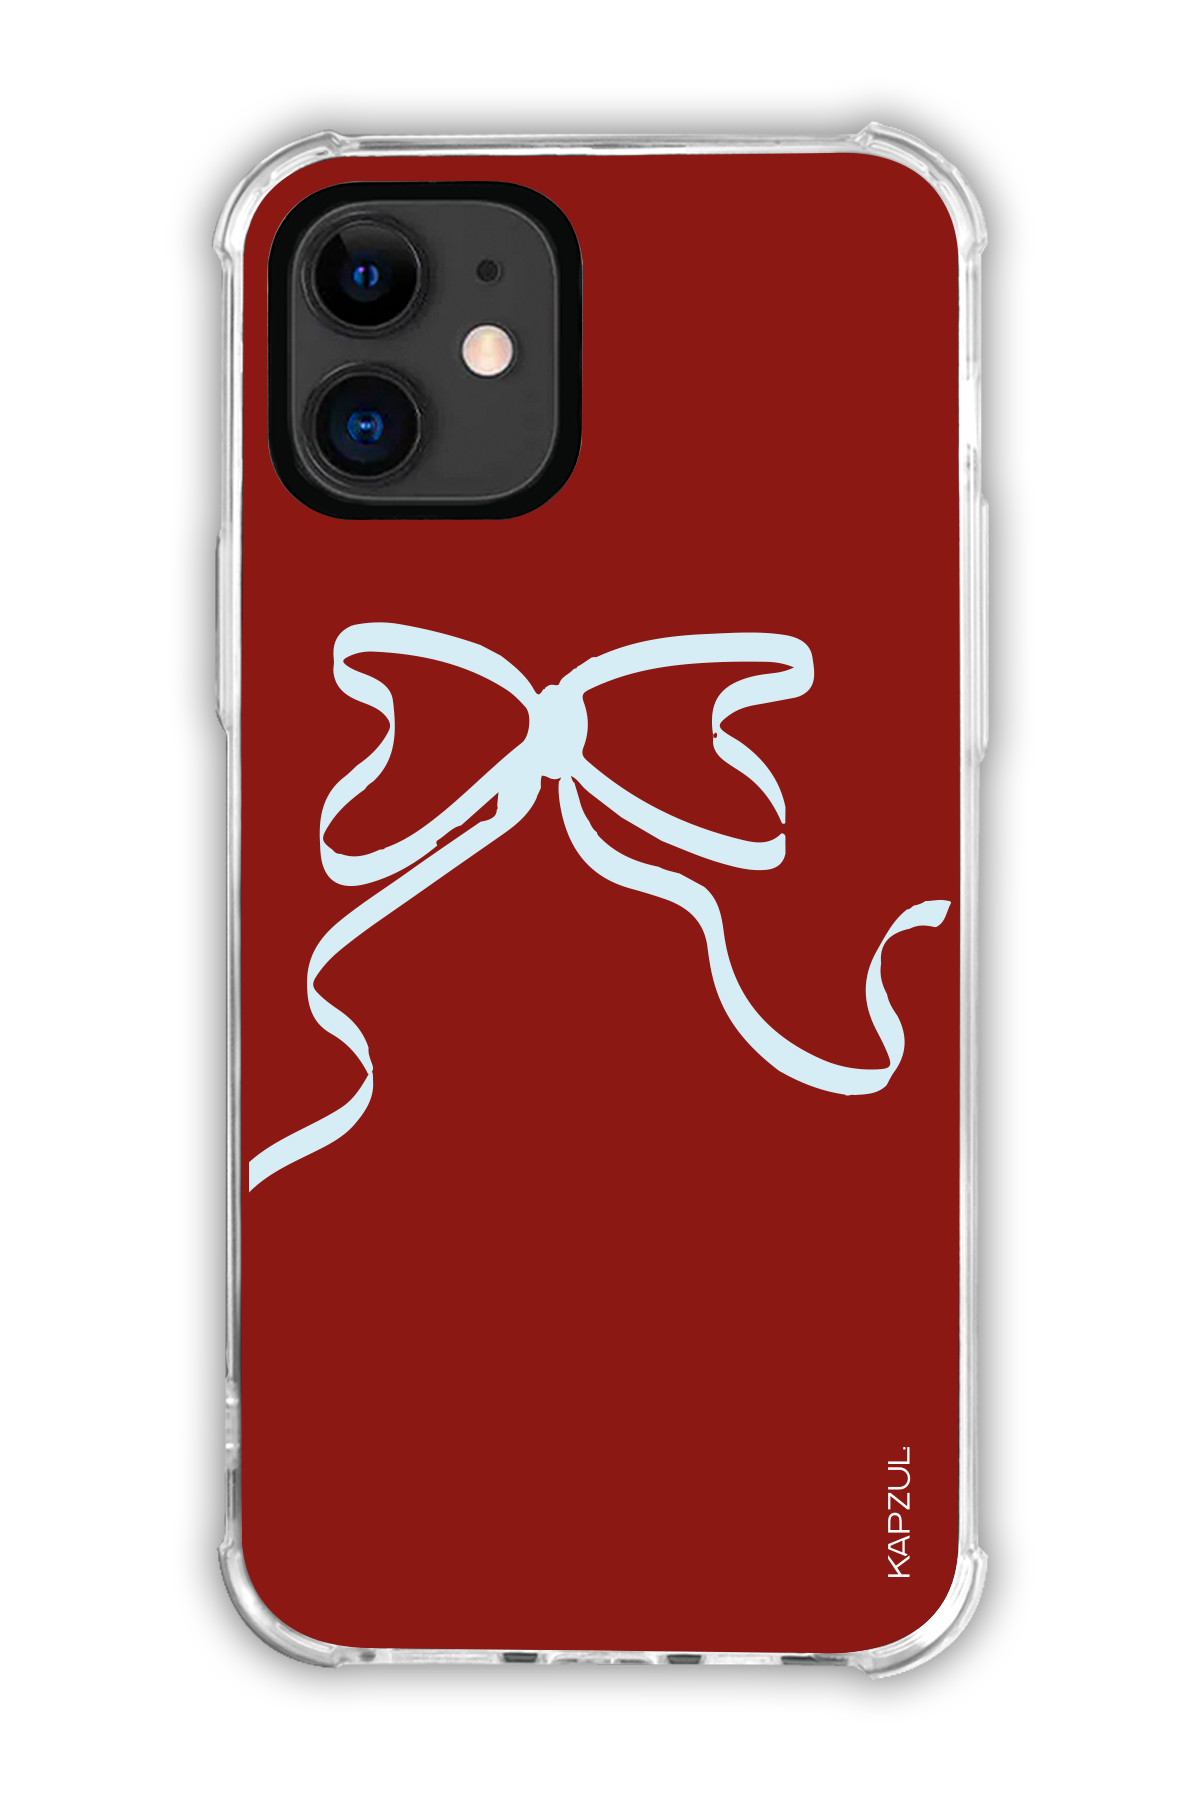 Simple Design - The Bow - The Bow – Love Letters - iPhone 11 - Transparent Case